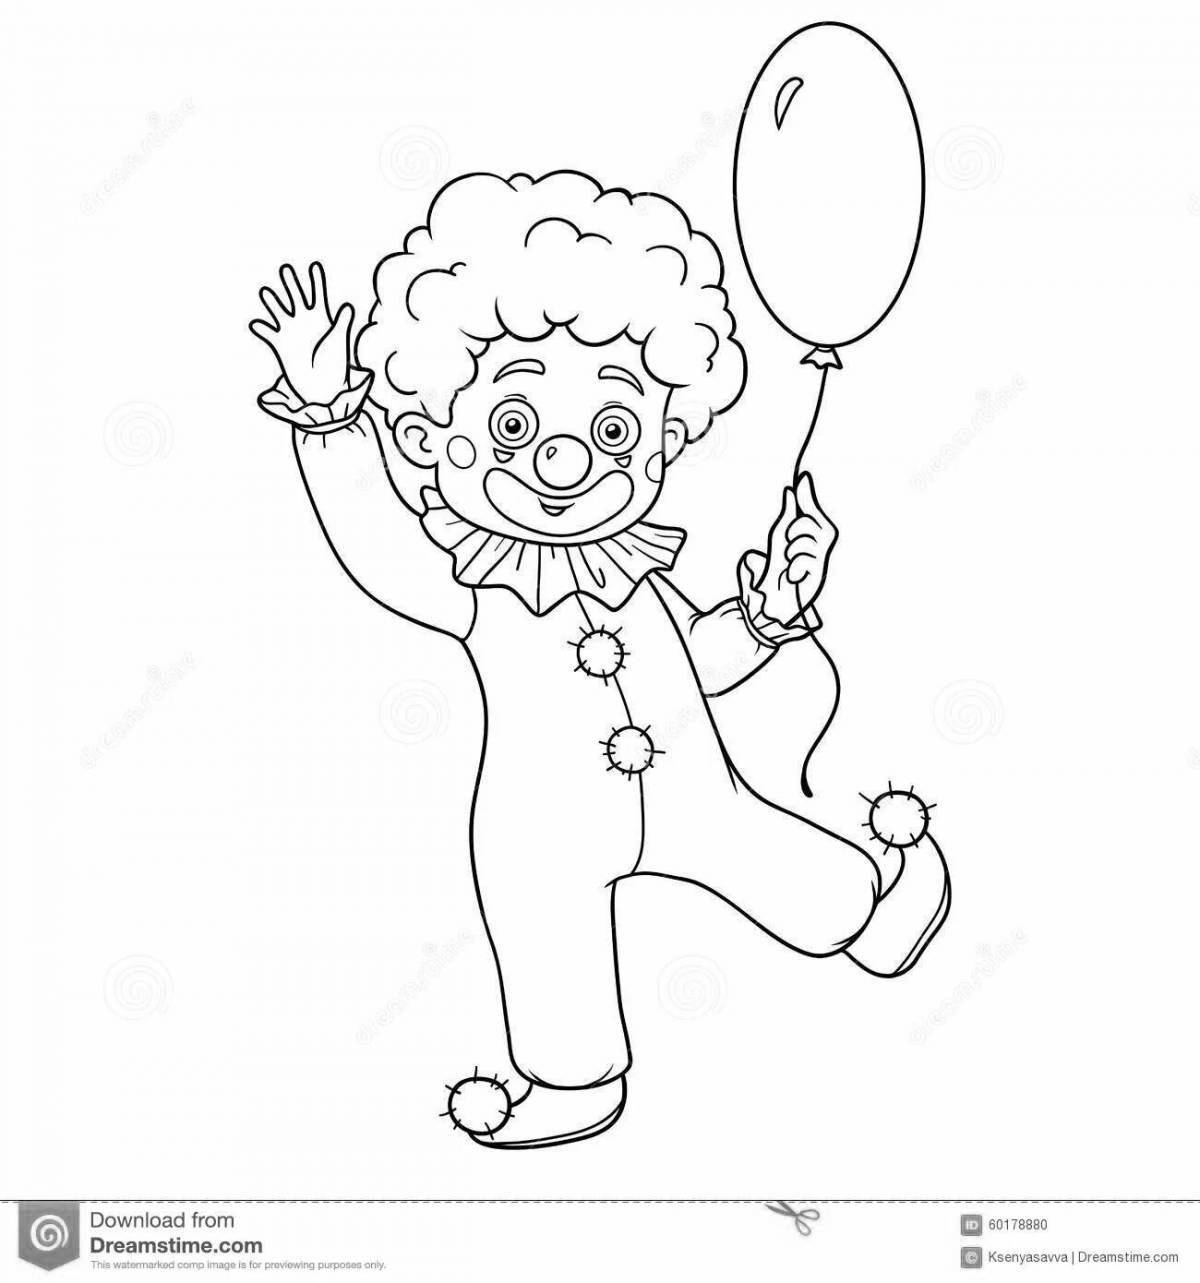 Strong clown with balloons